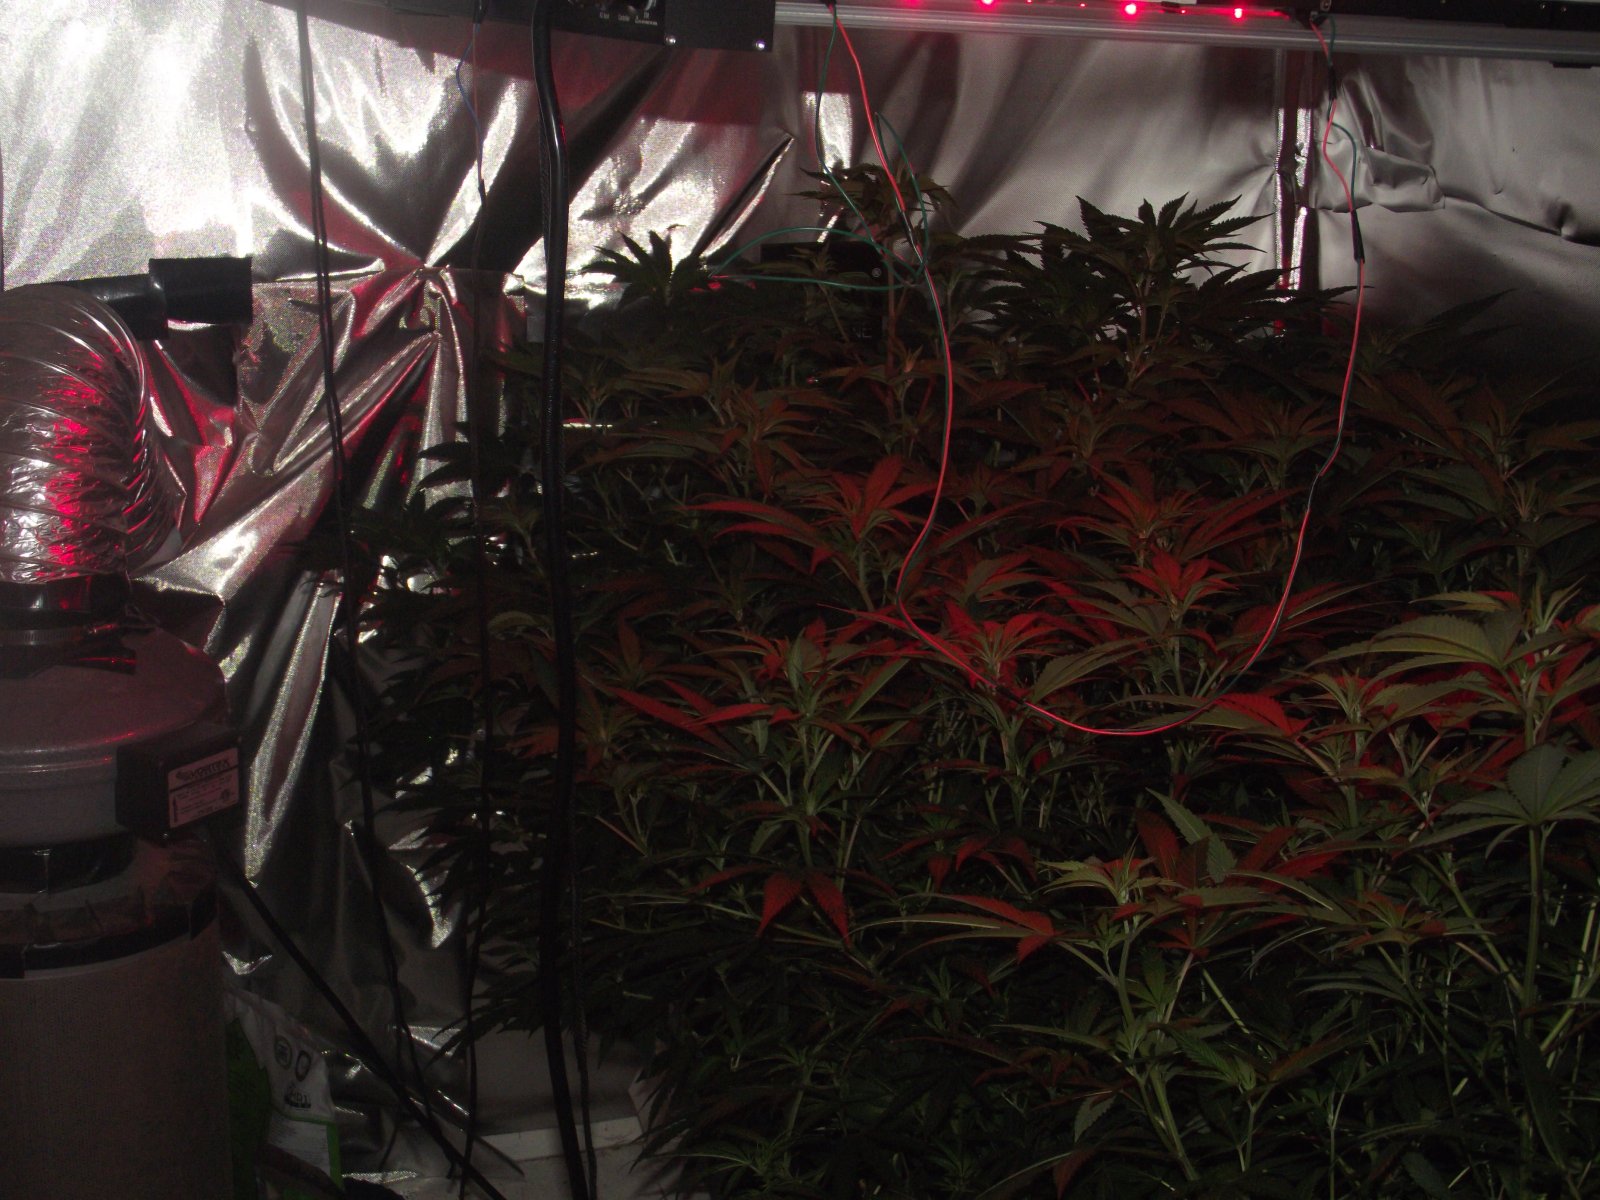 clone canopy day 3 transition.JPG